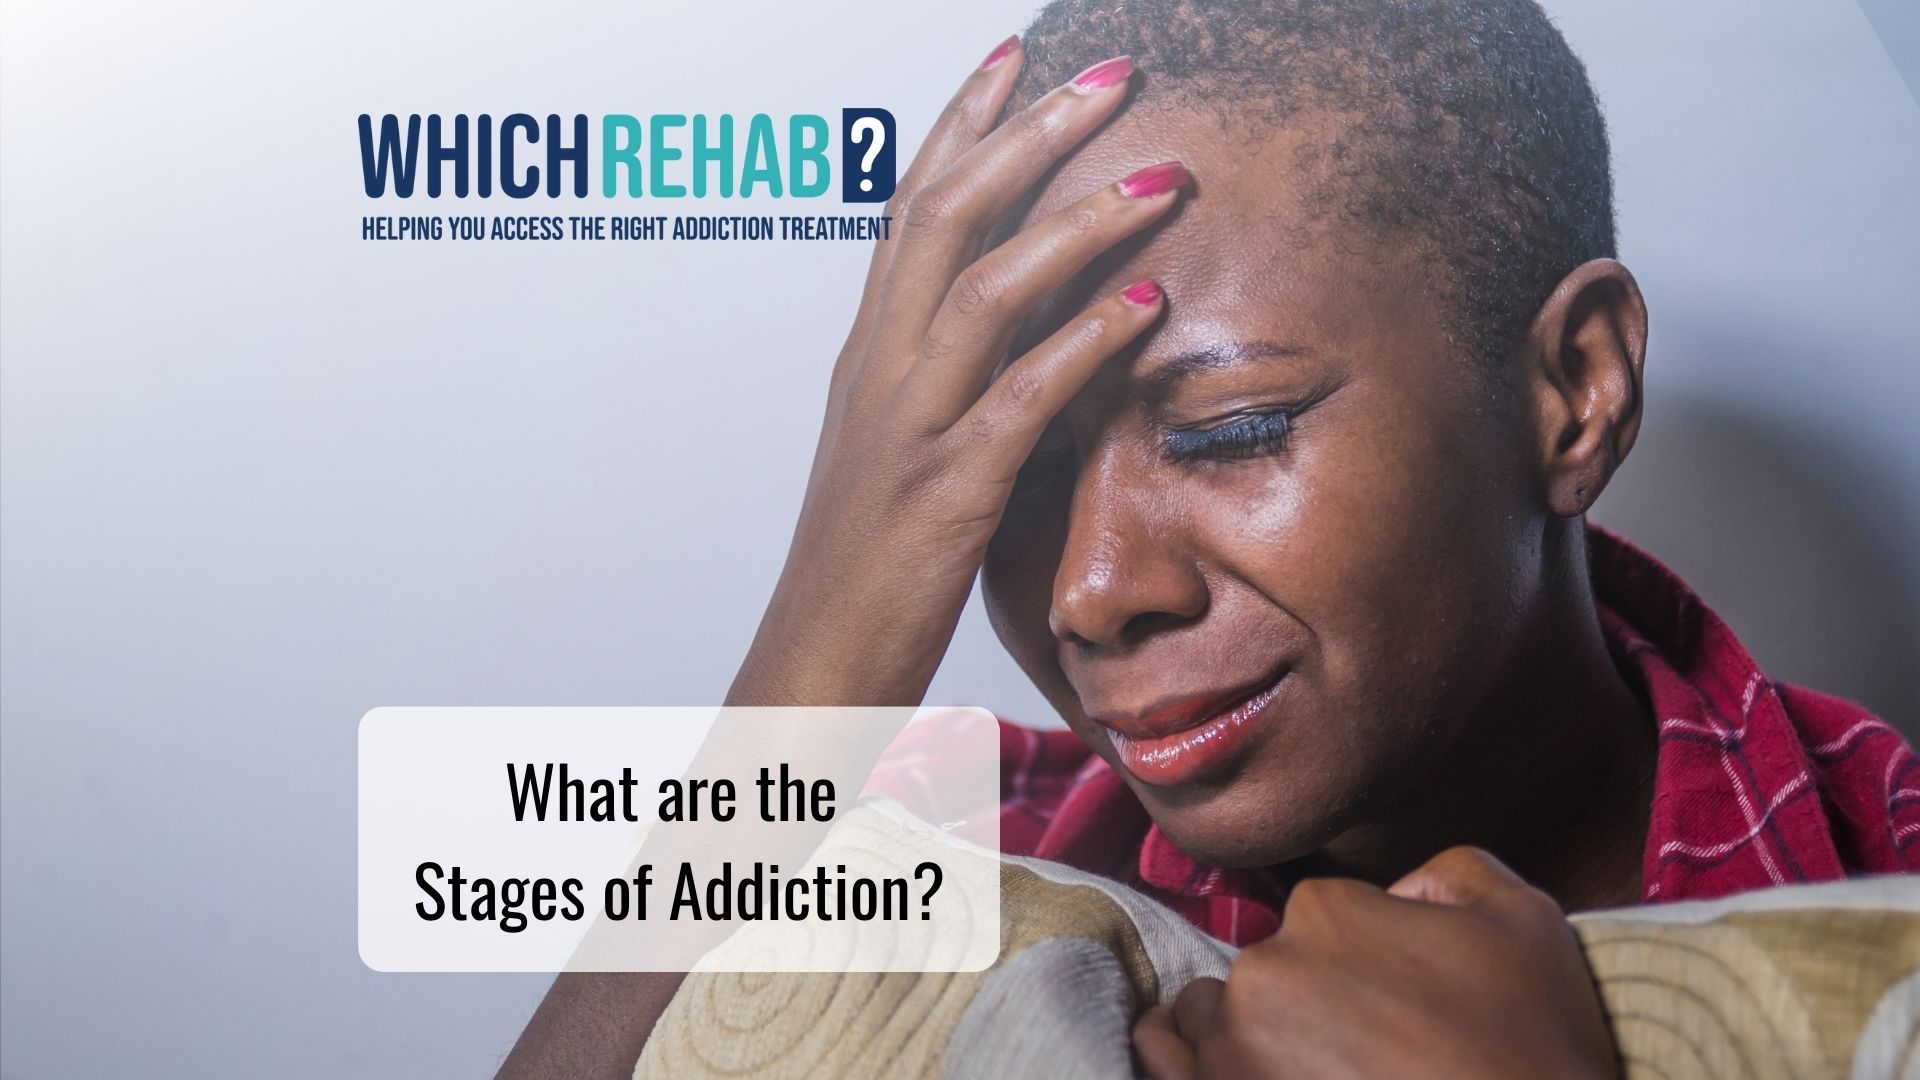 A woman suffering from addiction - What are the stages of addiction - Which Rehab